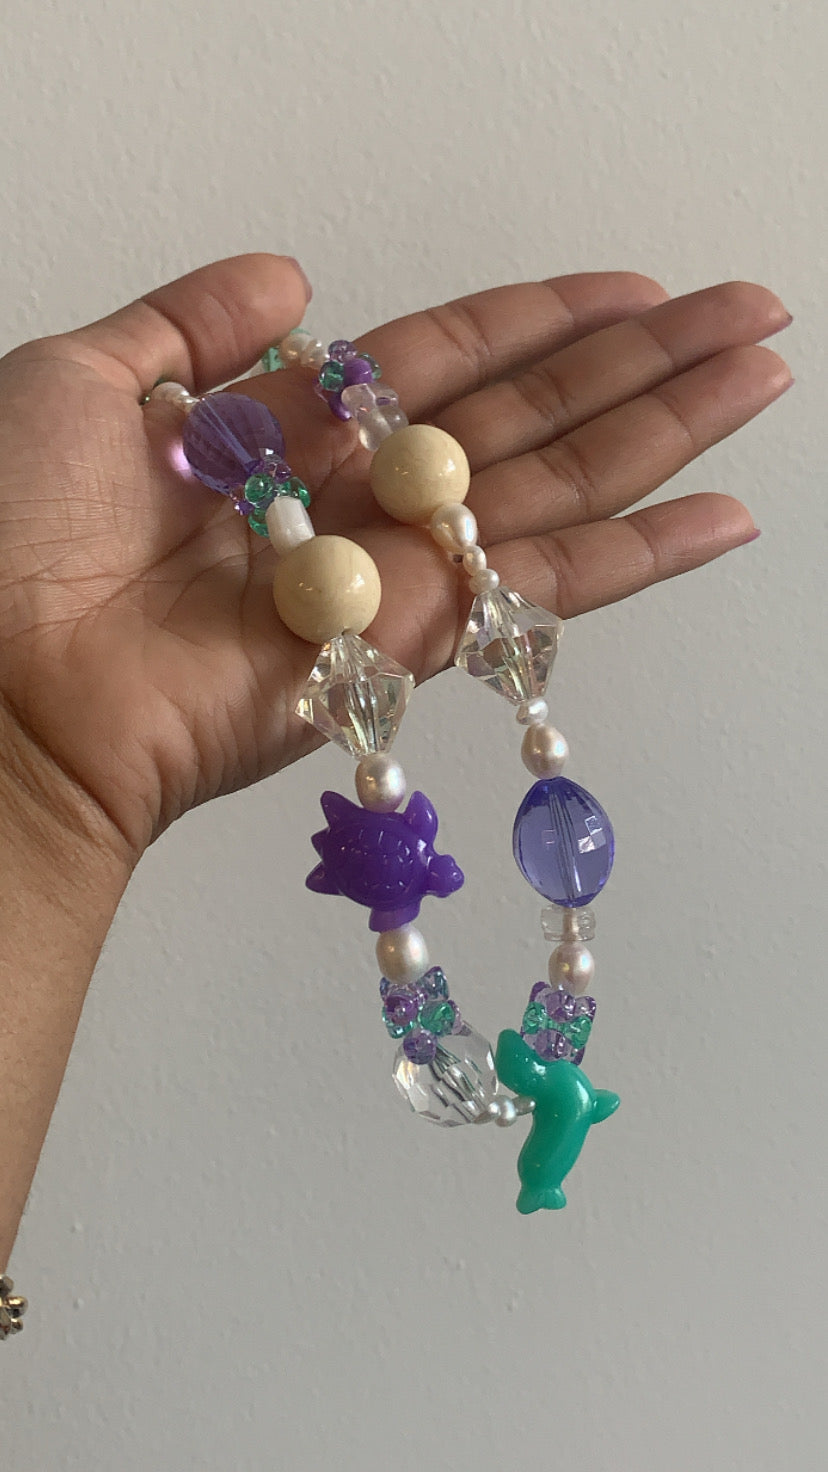 “Under the Sea" Upcycled Necklace